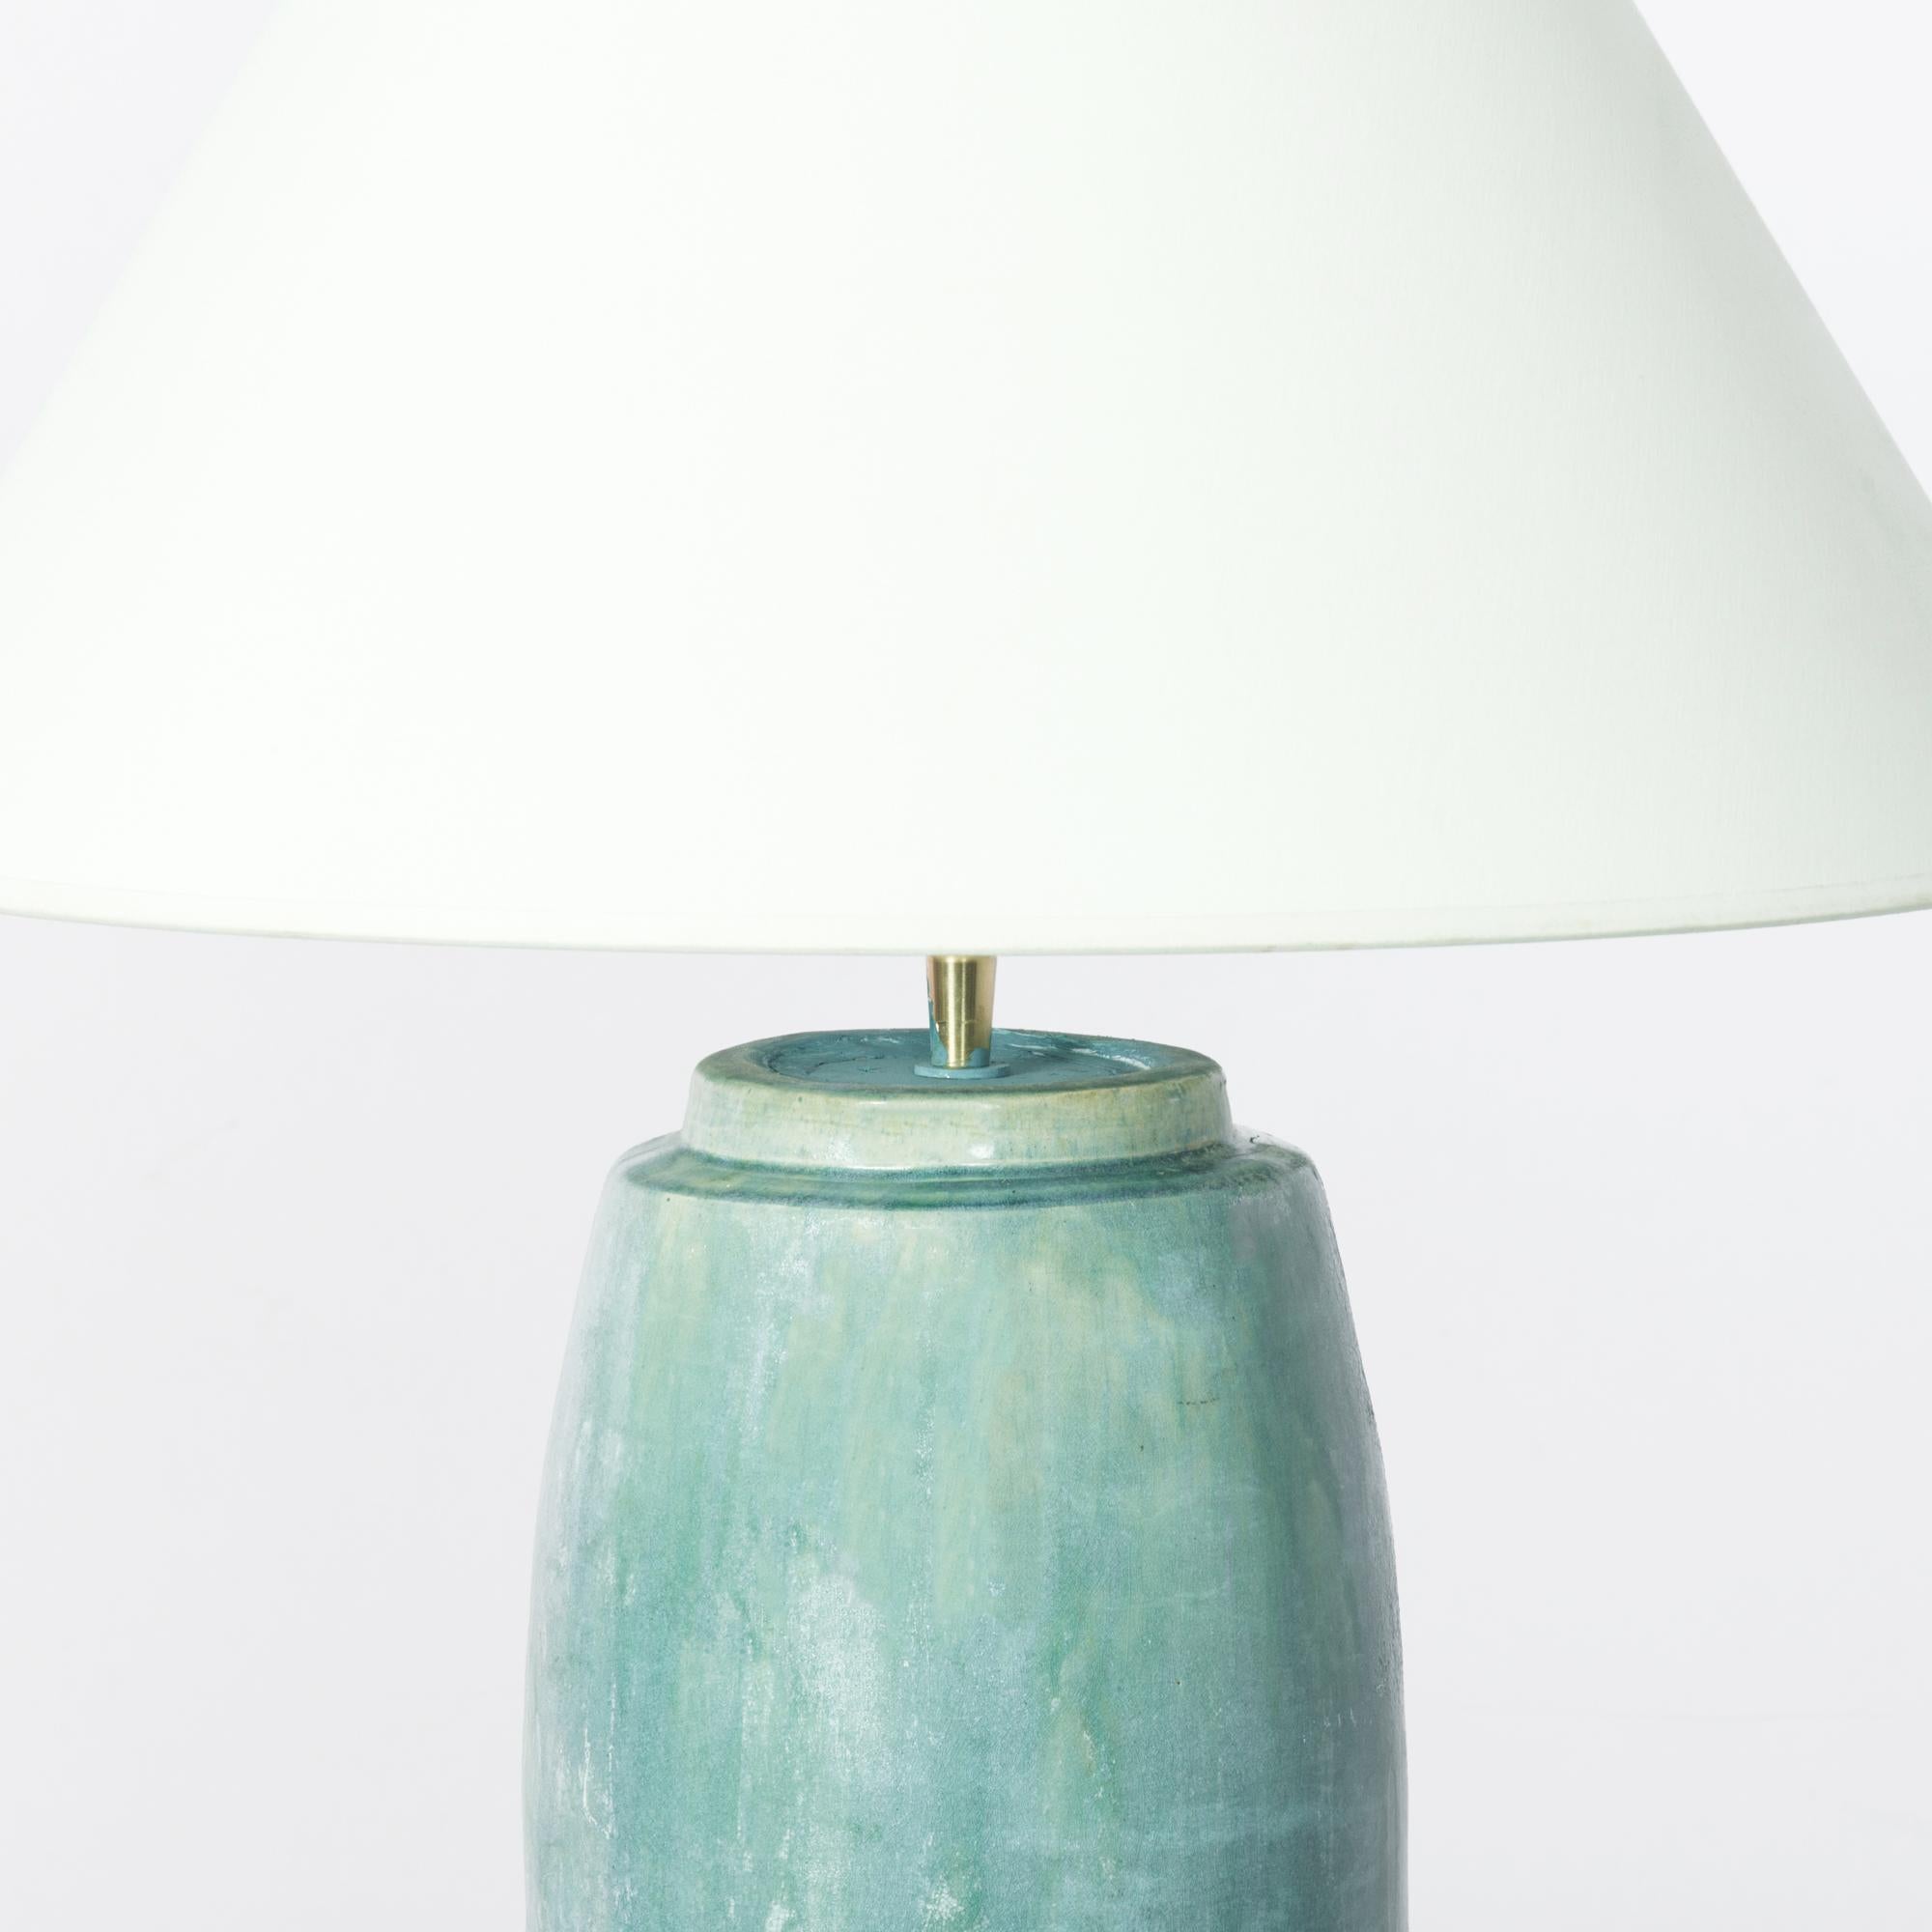 Contemporary Vintage Chinese Celadon Ceramic Vase Table Lamp